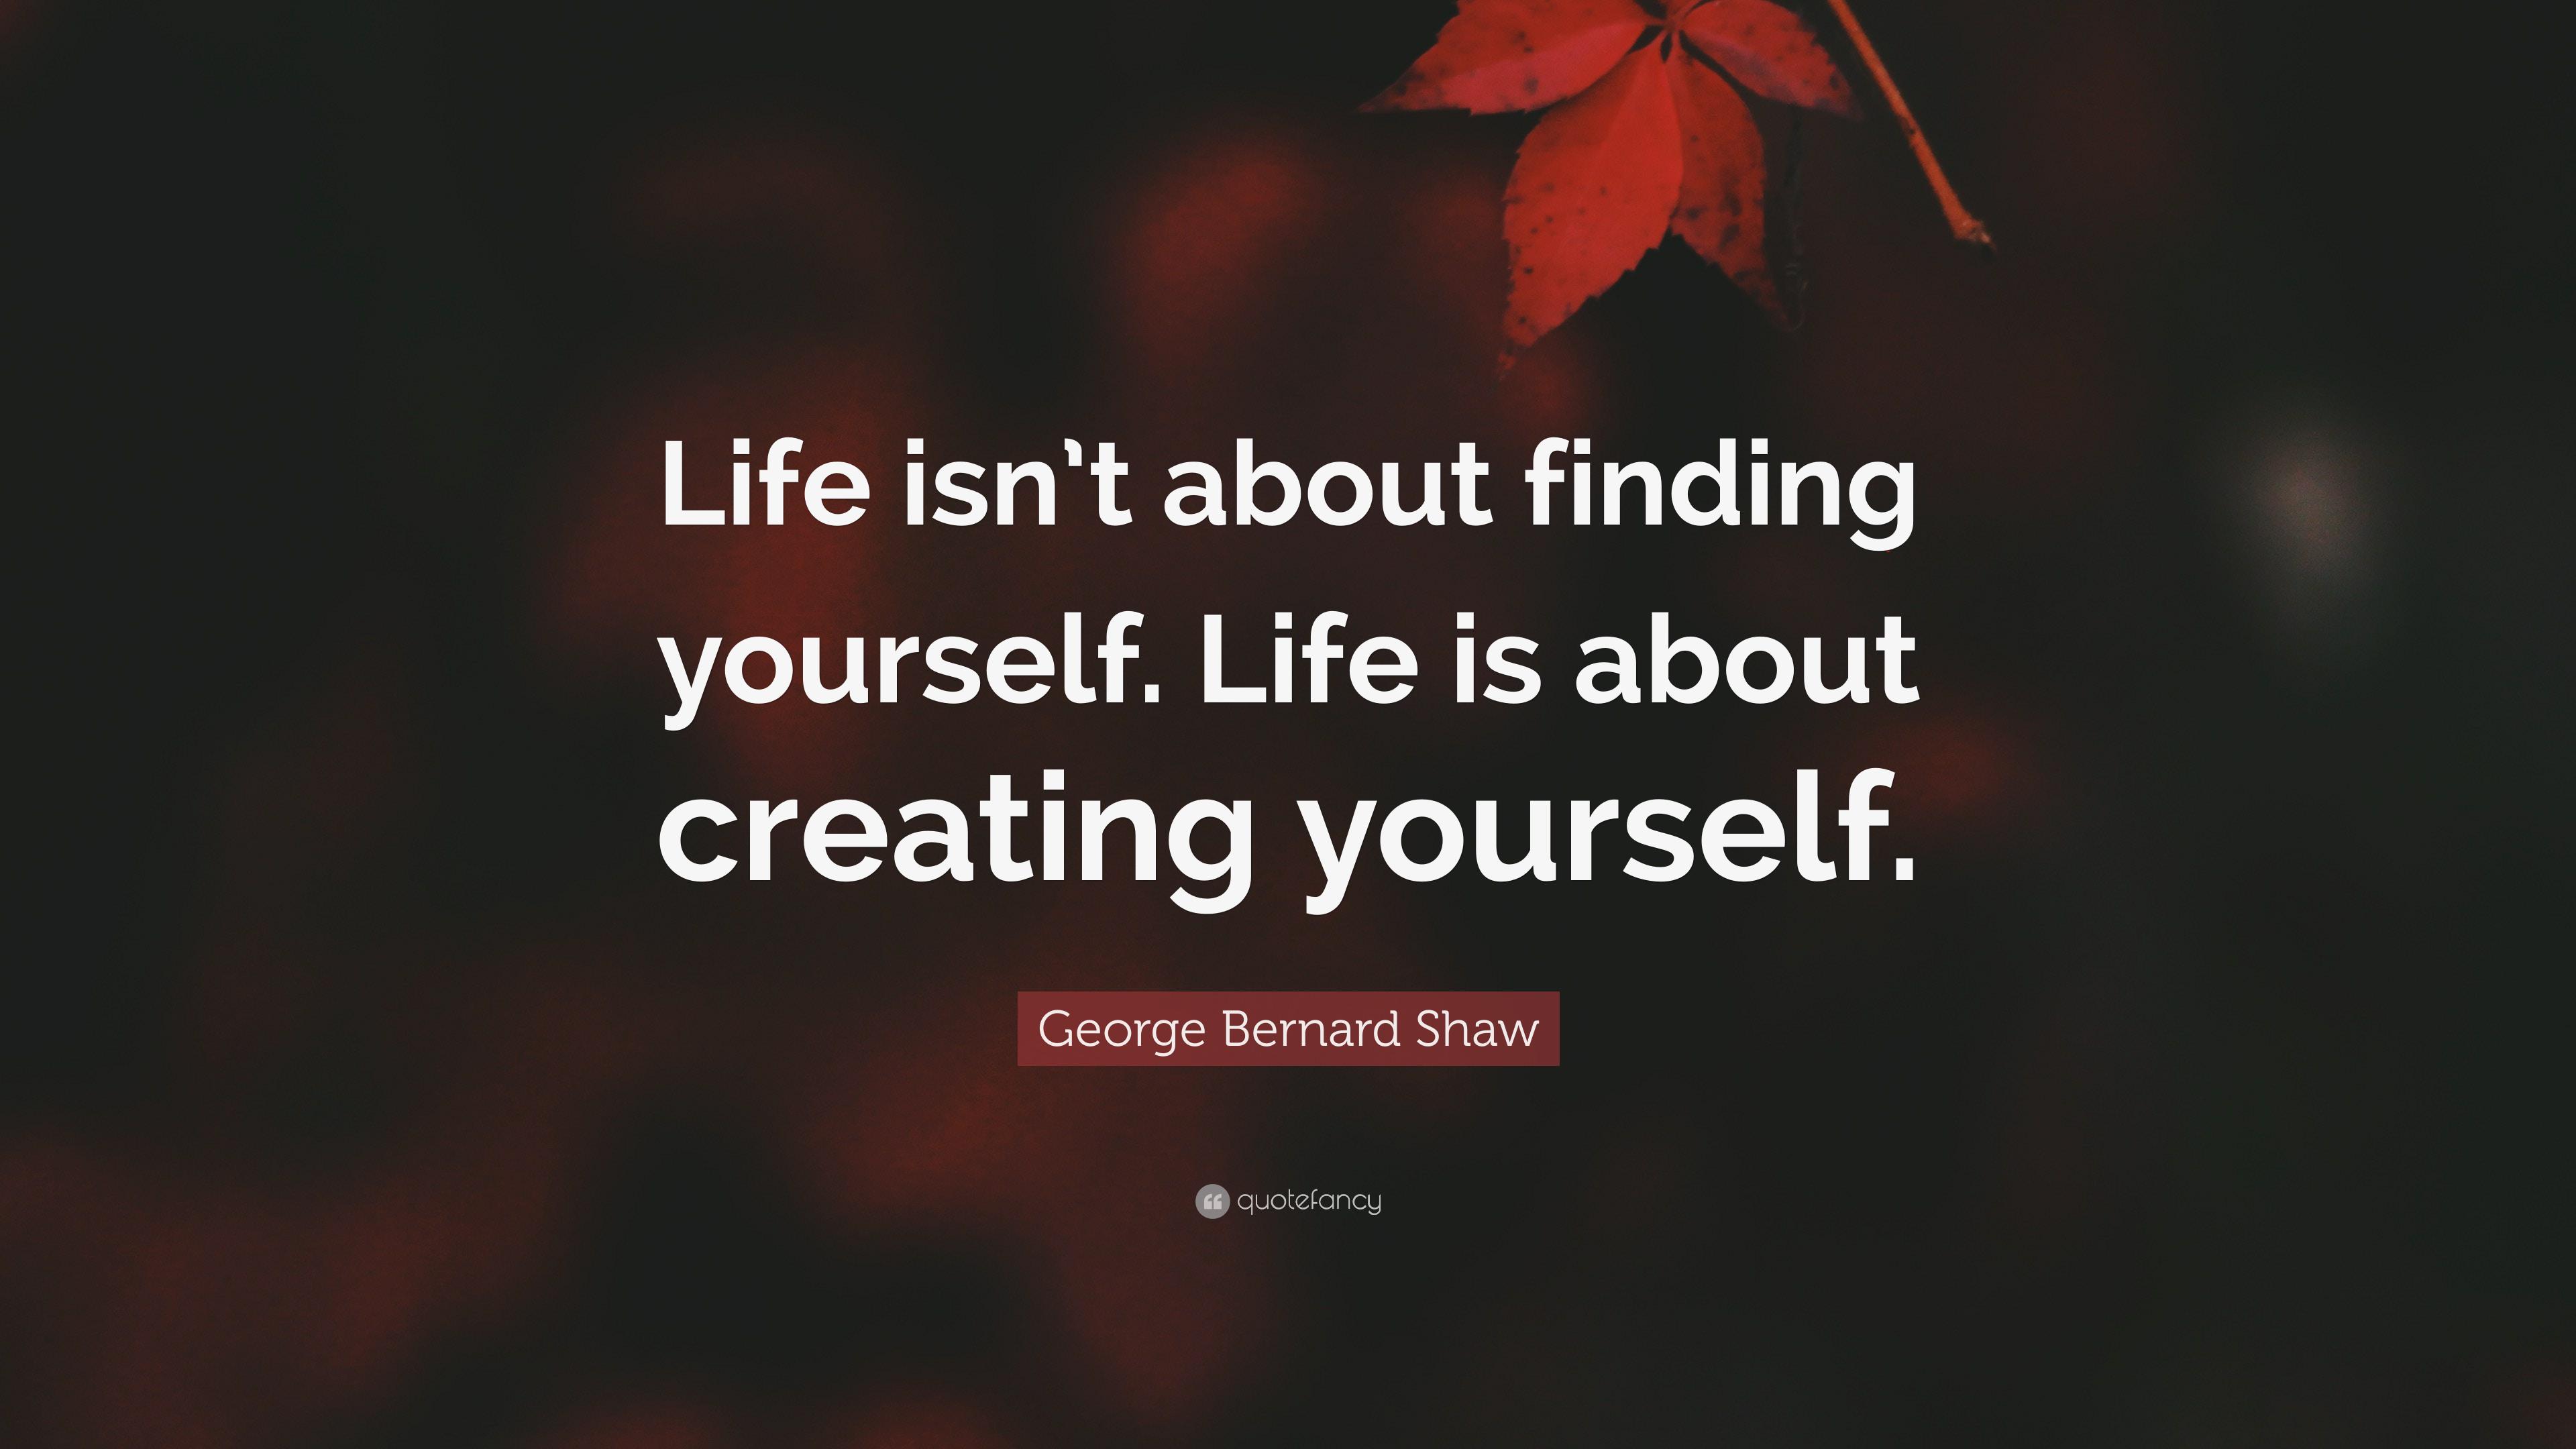 George Bernard Shaw Quote: “Life isn't about finding yourself. Life is about creating yourself.”